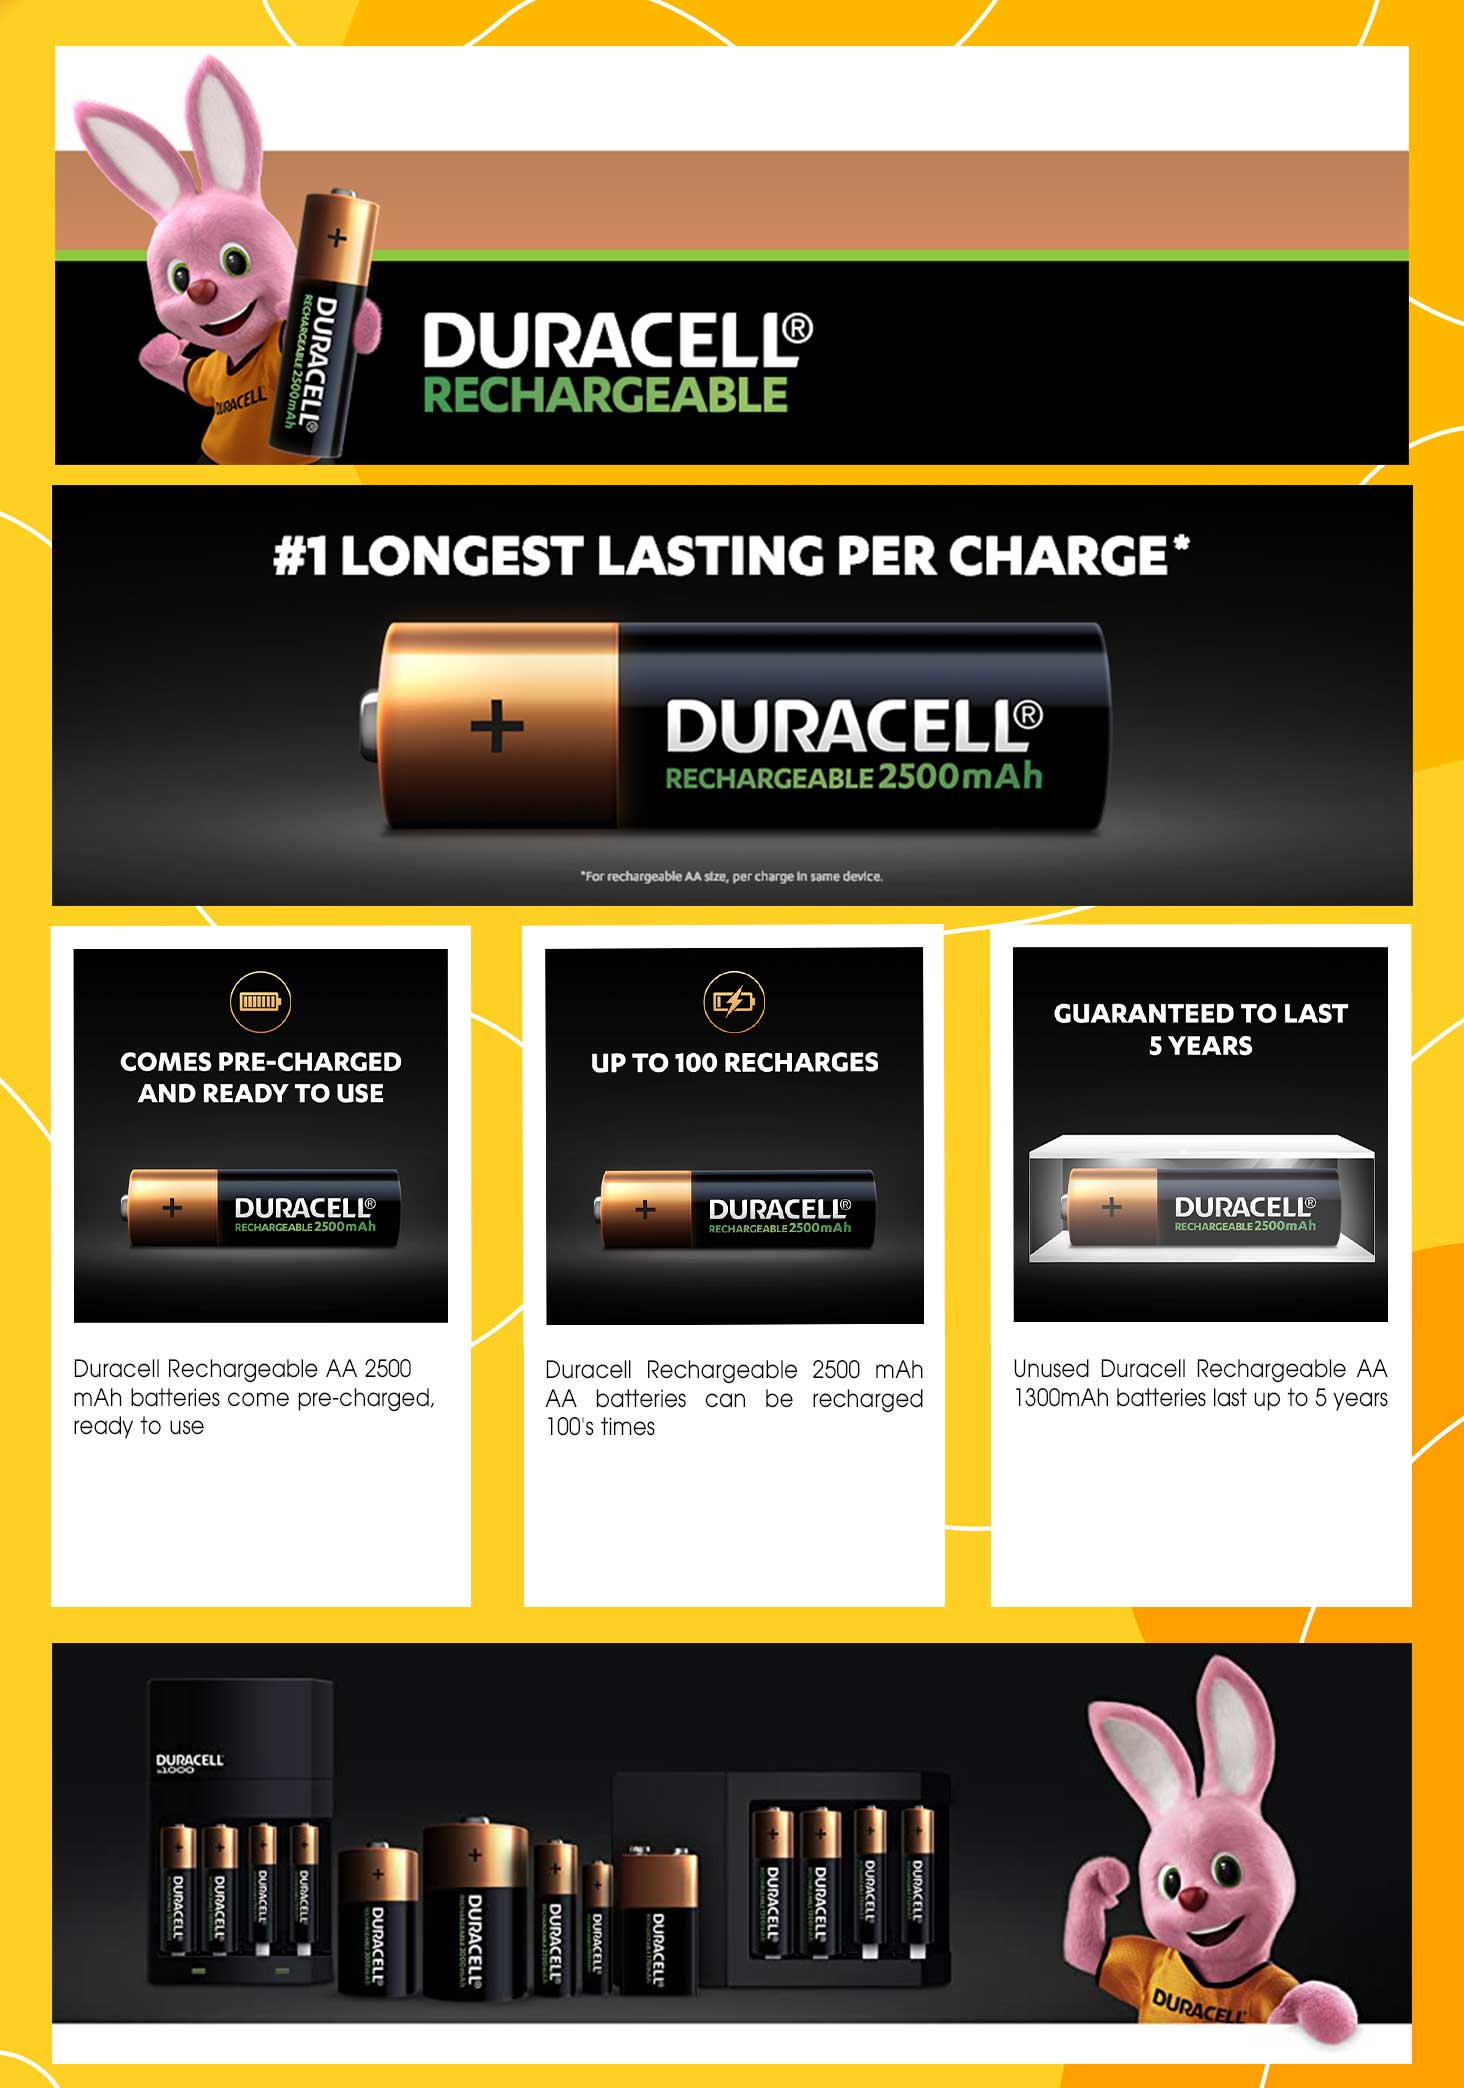 Duracell-Rechargeable-AA-2500-mAh-Batteries-ideal-for-Xbox-controller--pack-of-4.jpg?1667949385604